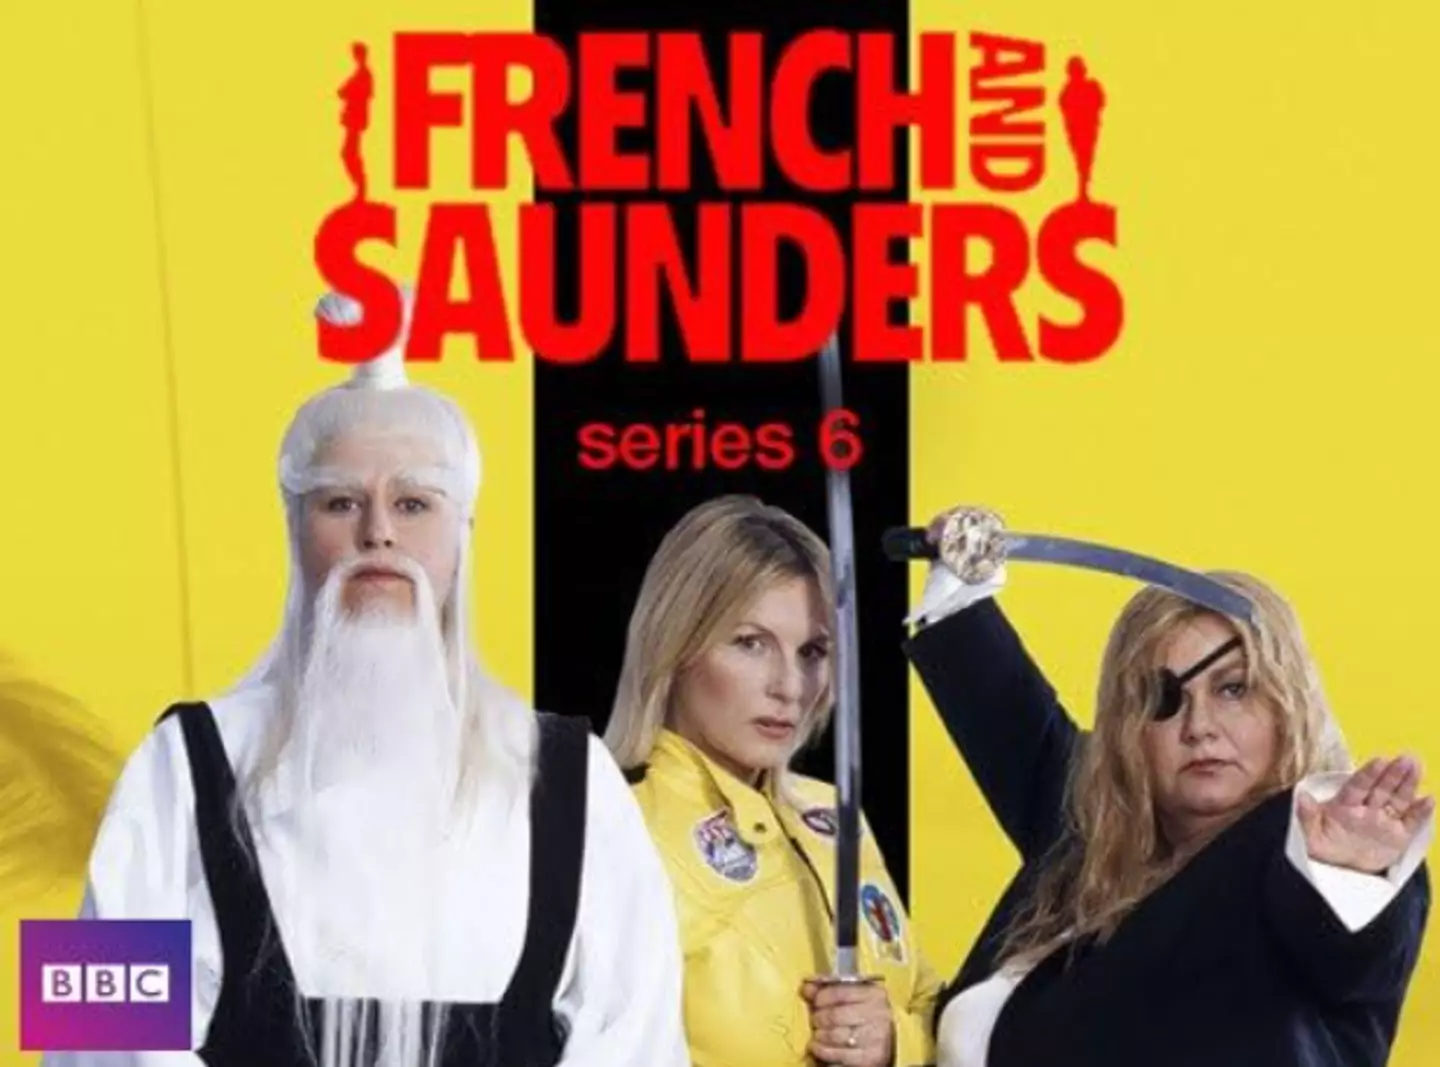 French & Saunders hit the small screen in 1987.